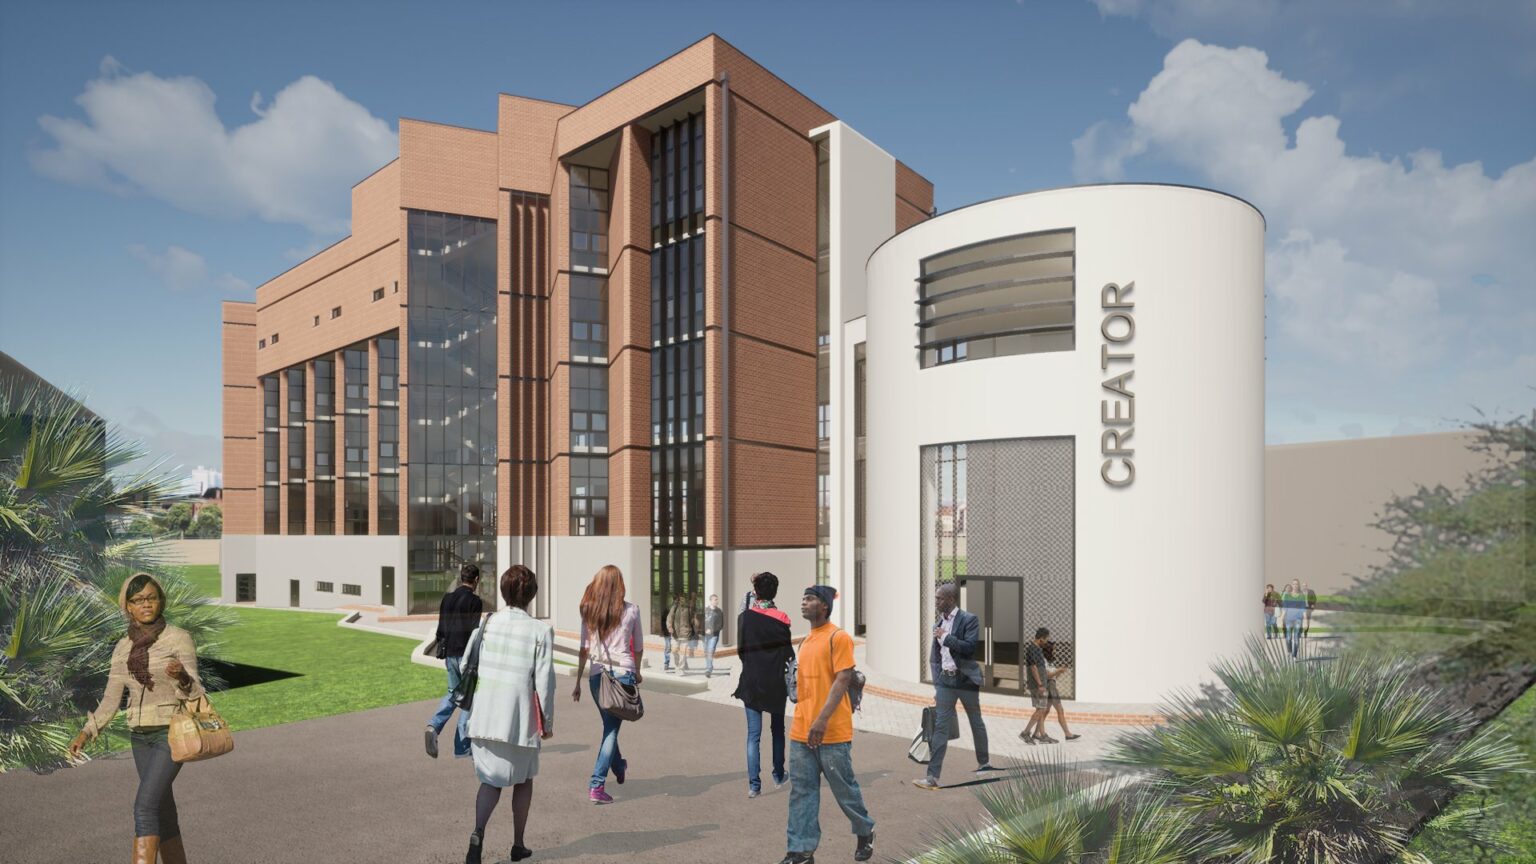 Building work starts on Malawi postgraduate medical and research training centre